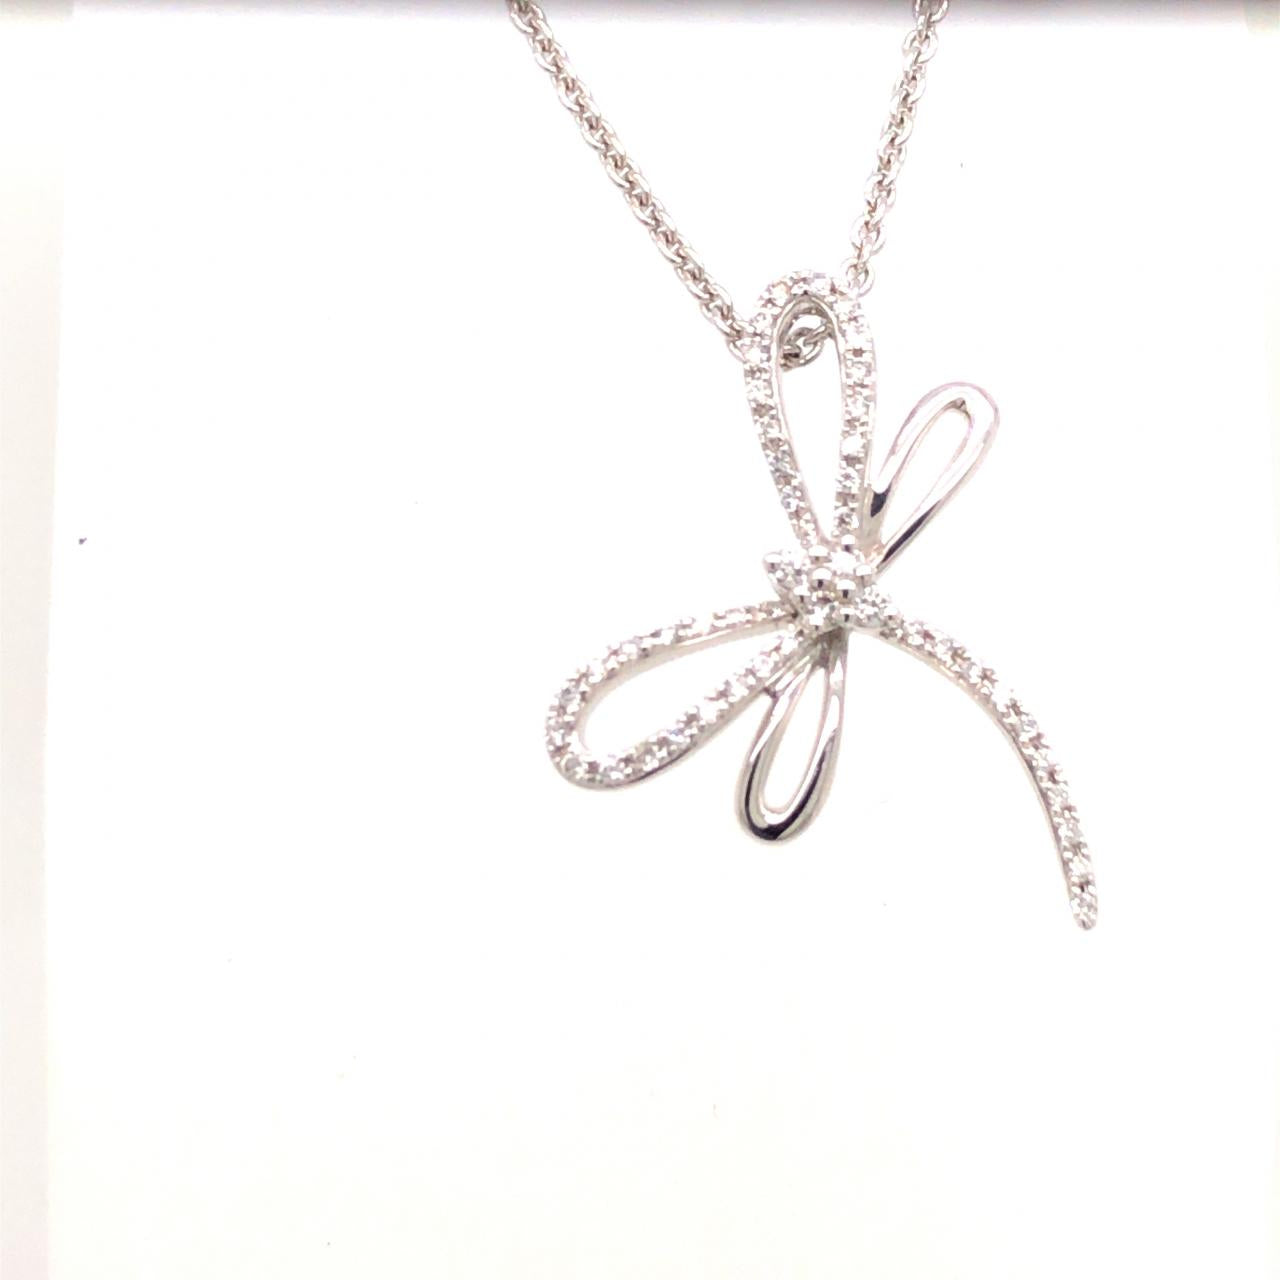 White gold dragonfly necklace